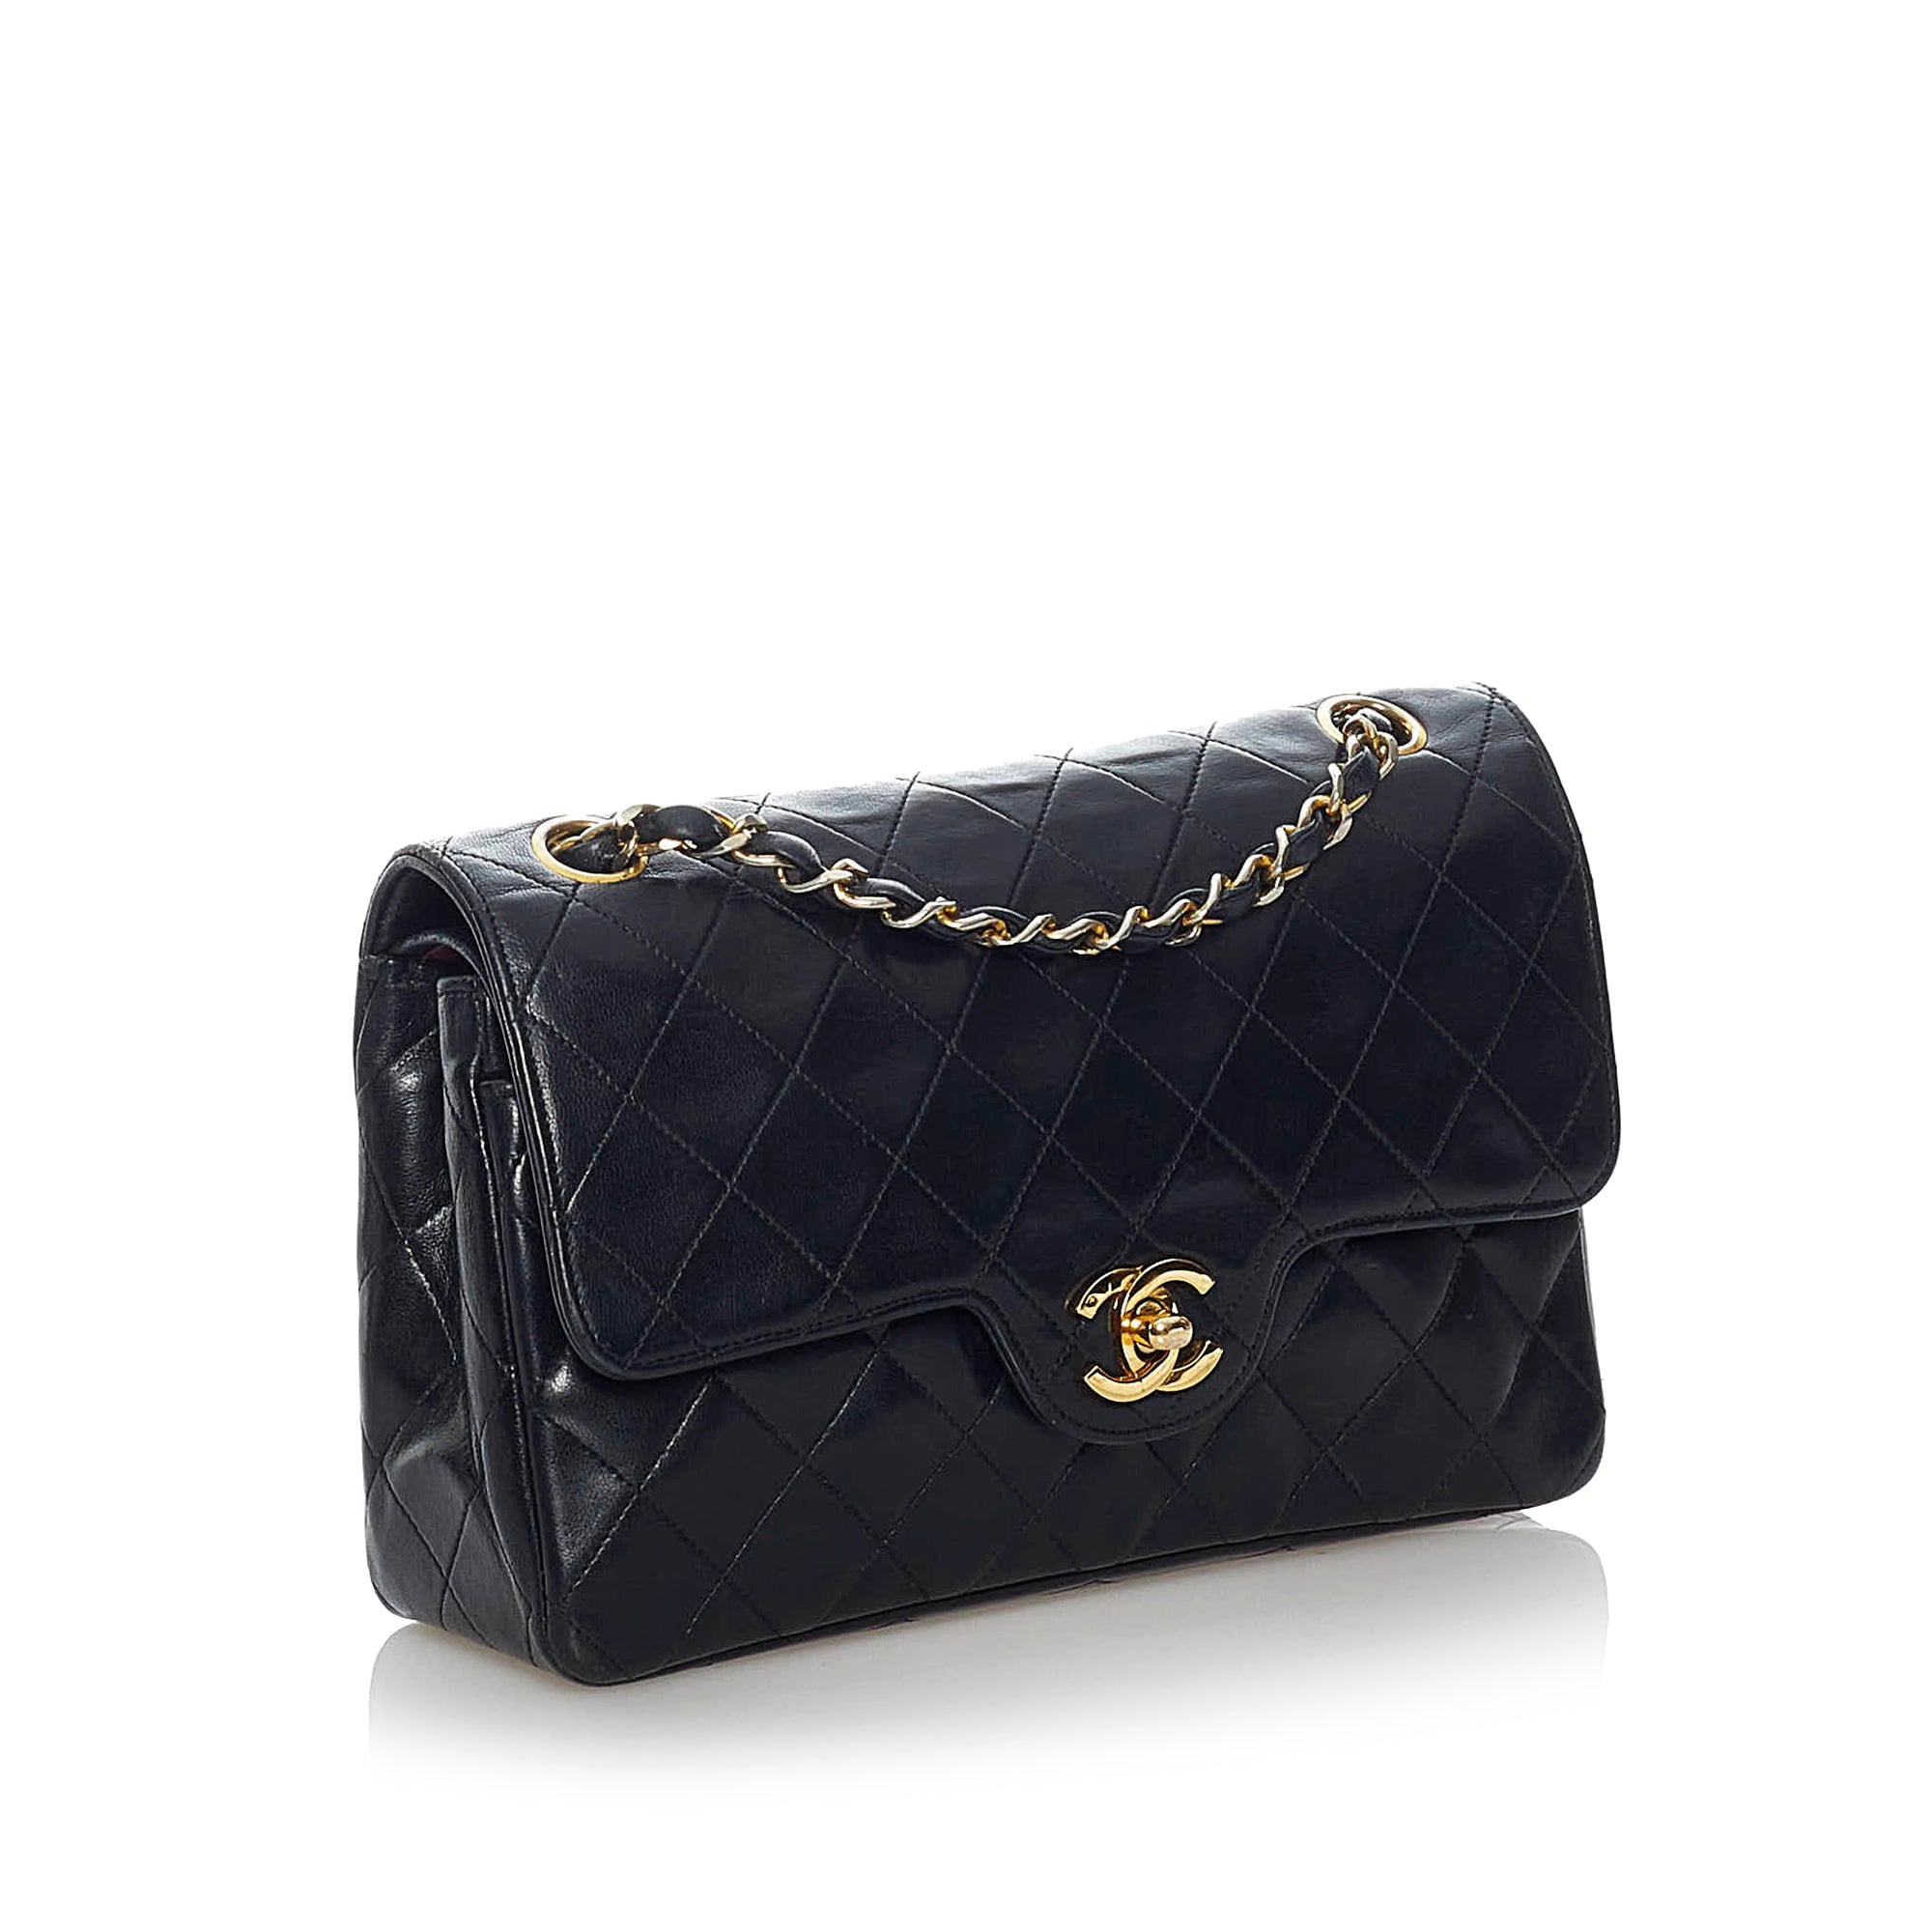 Black Chanel Small Classic Lambskin Leather Double Flap Bag, Infrastructure-intelligenceShops Revival